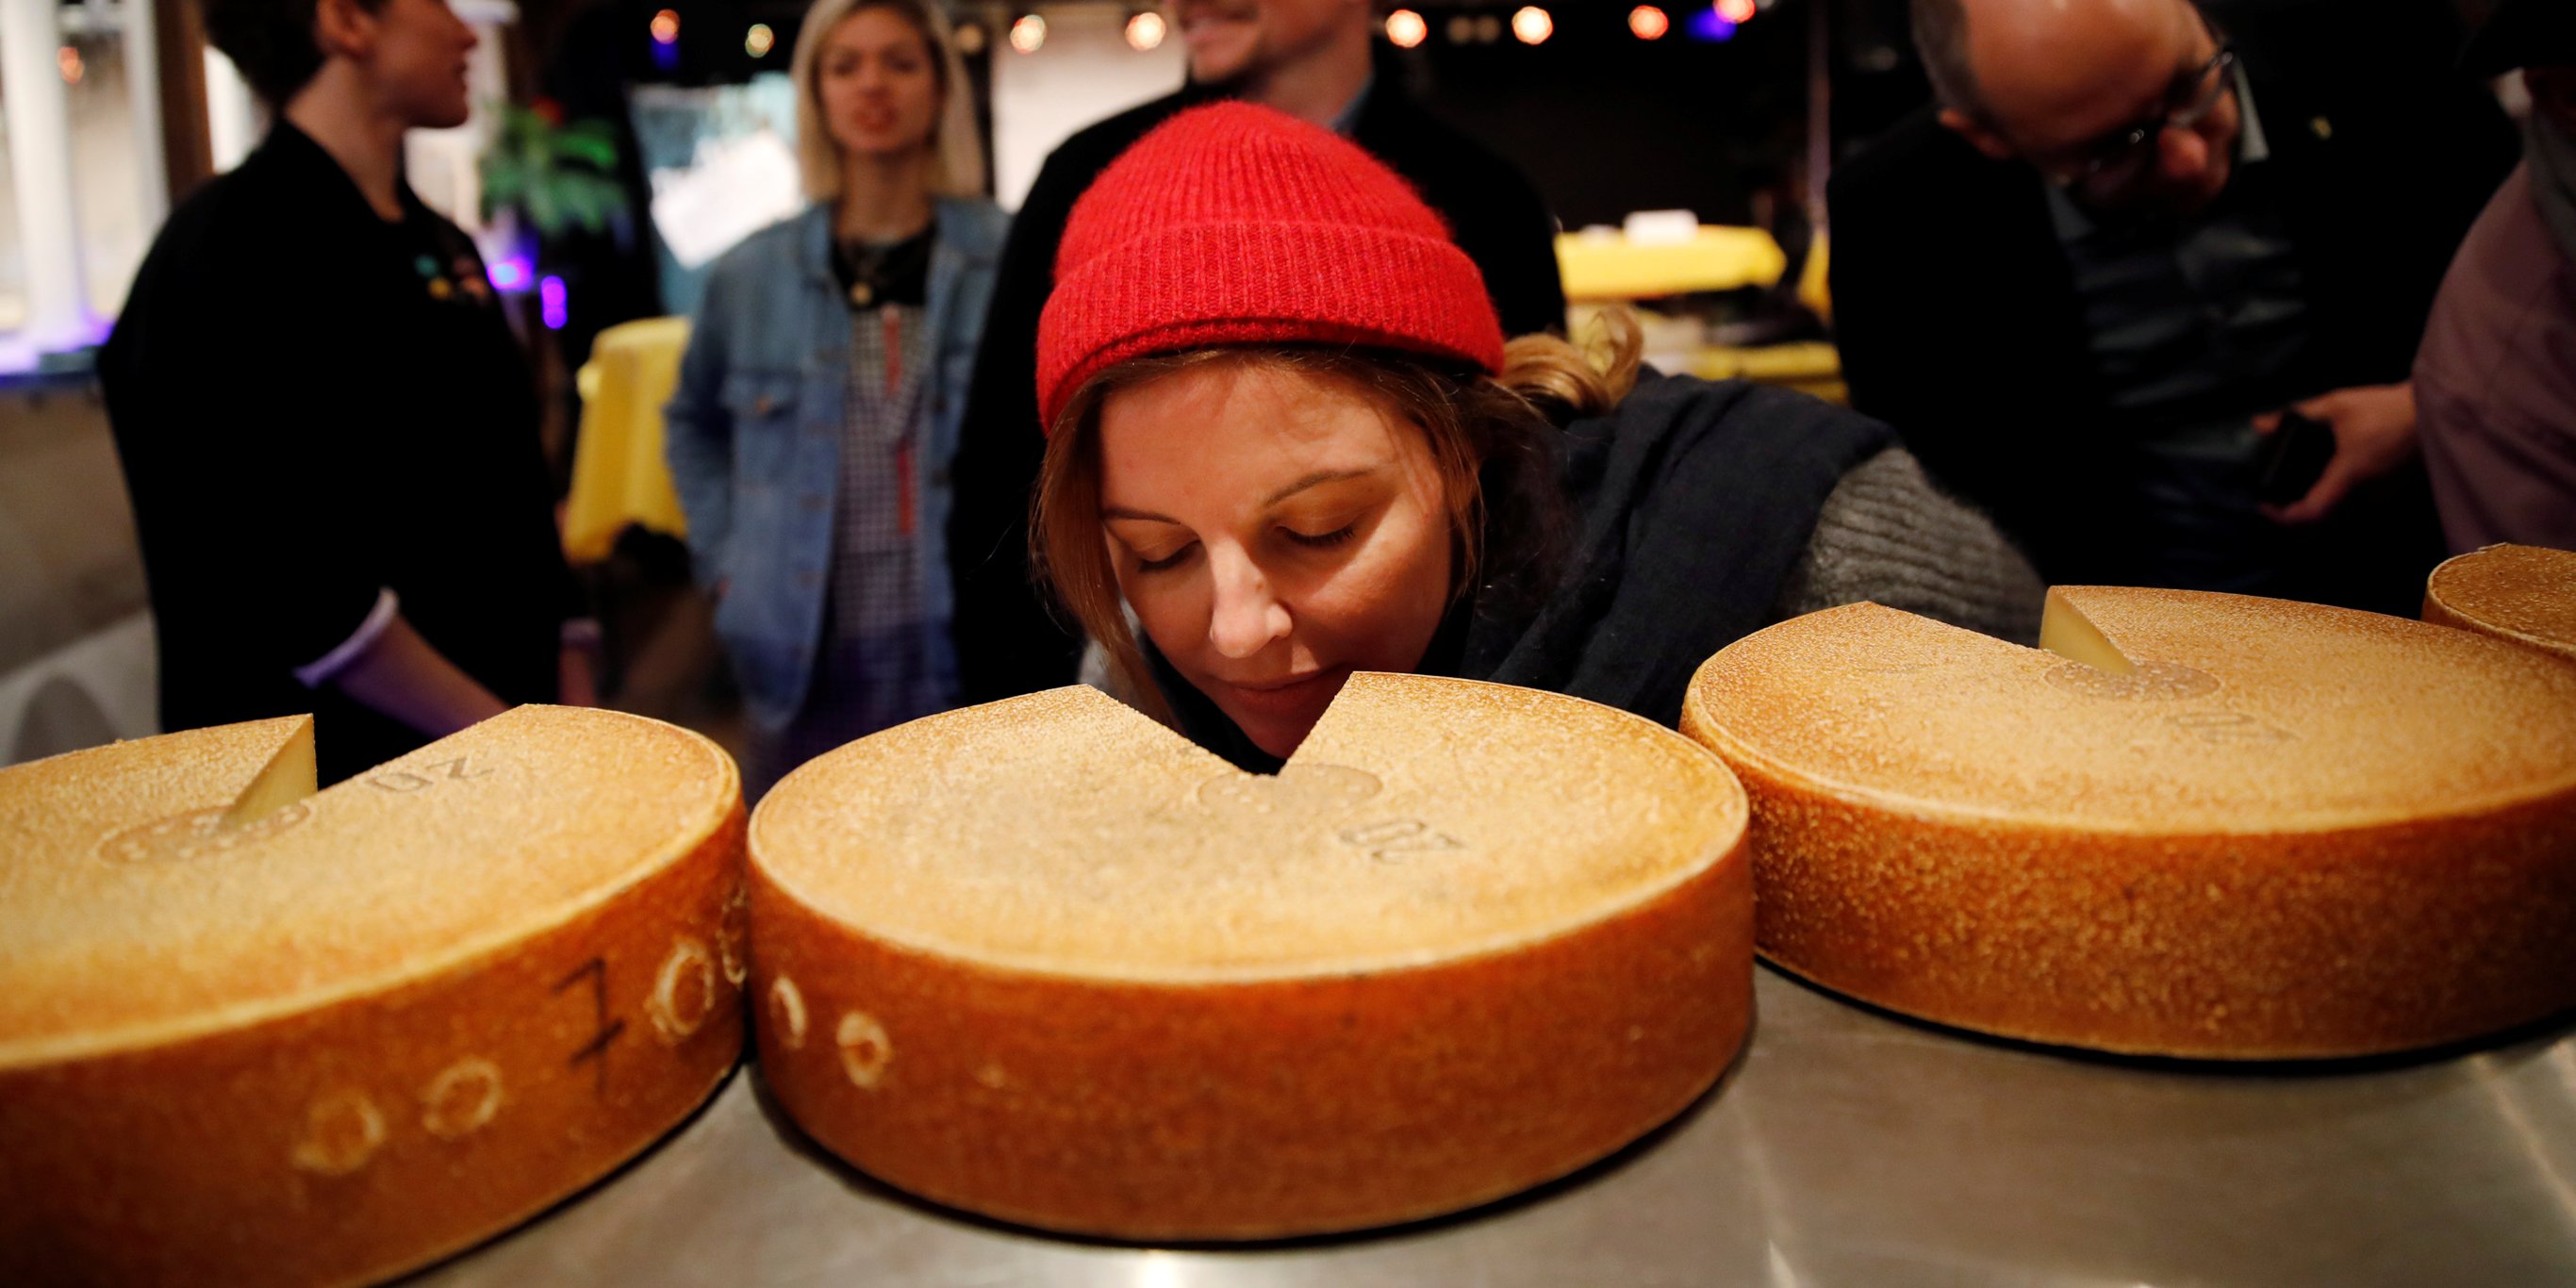 Exposing cheese to round-the-clock hip hop music could give it more flavor, according to Swiss researchers